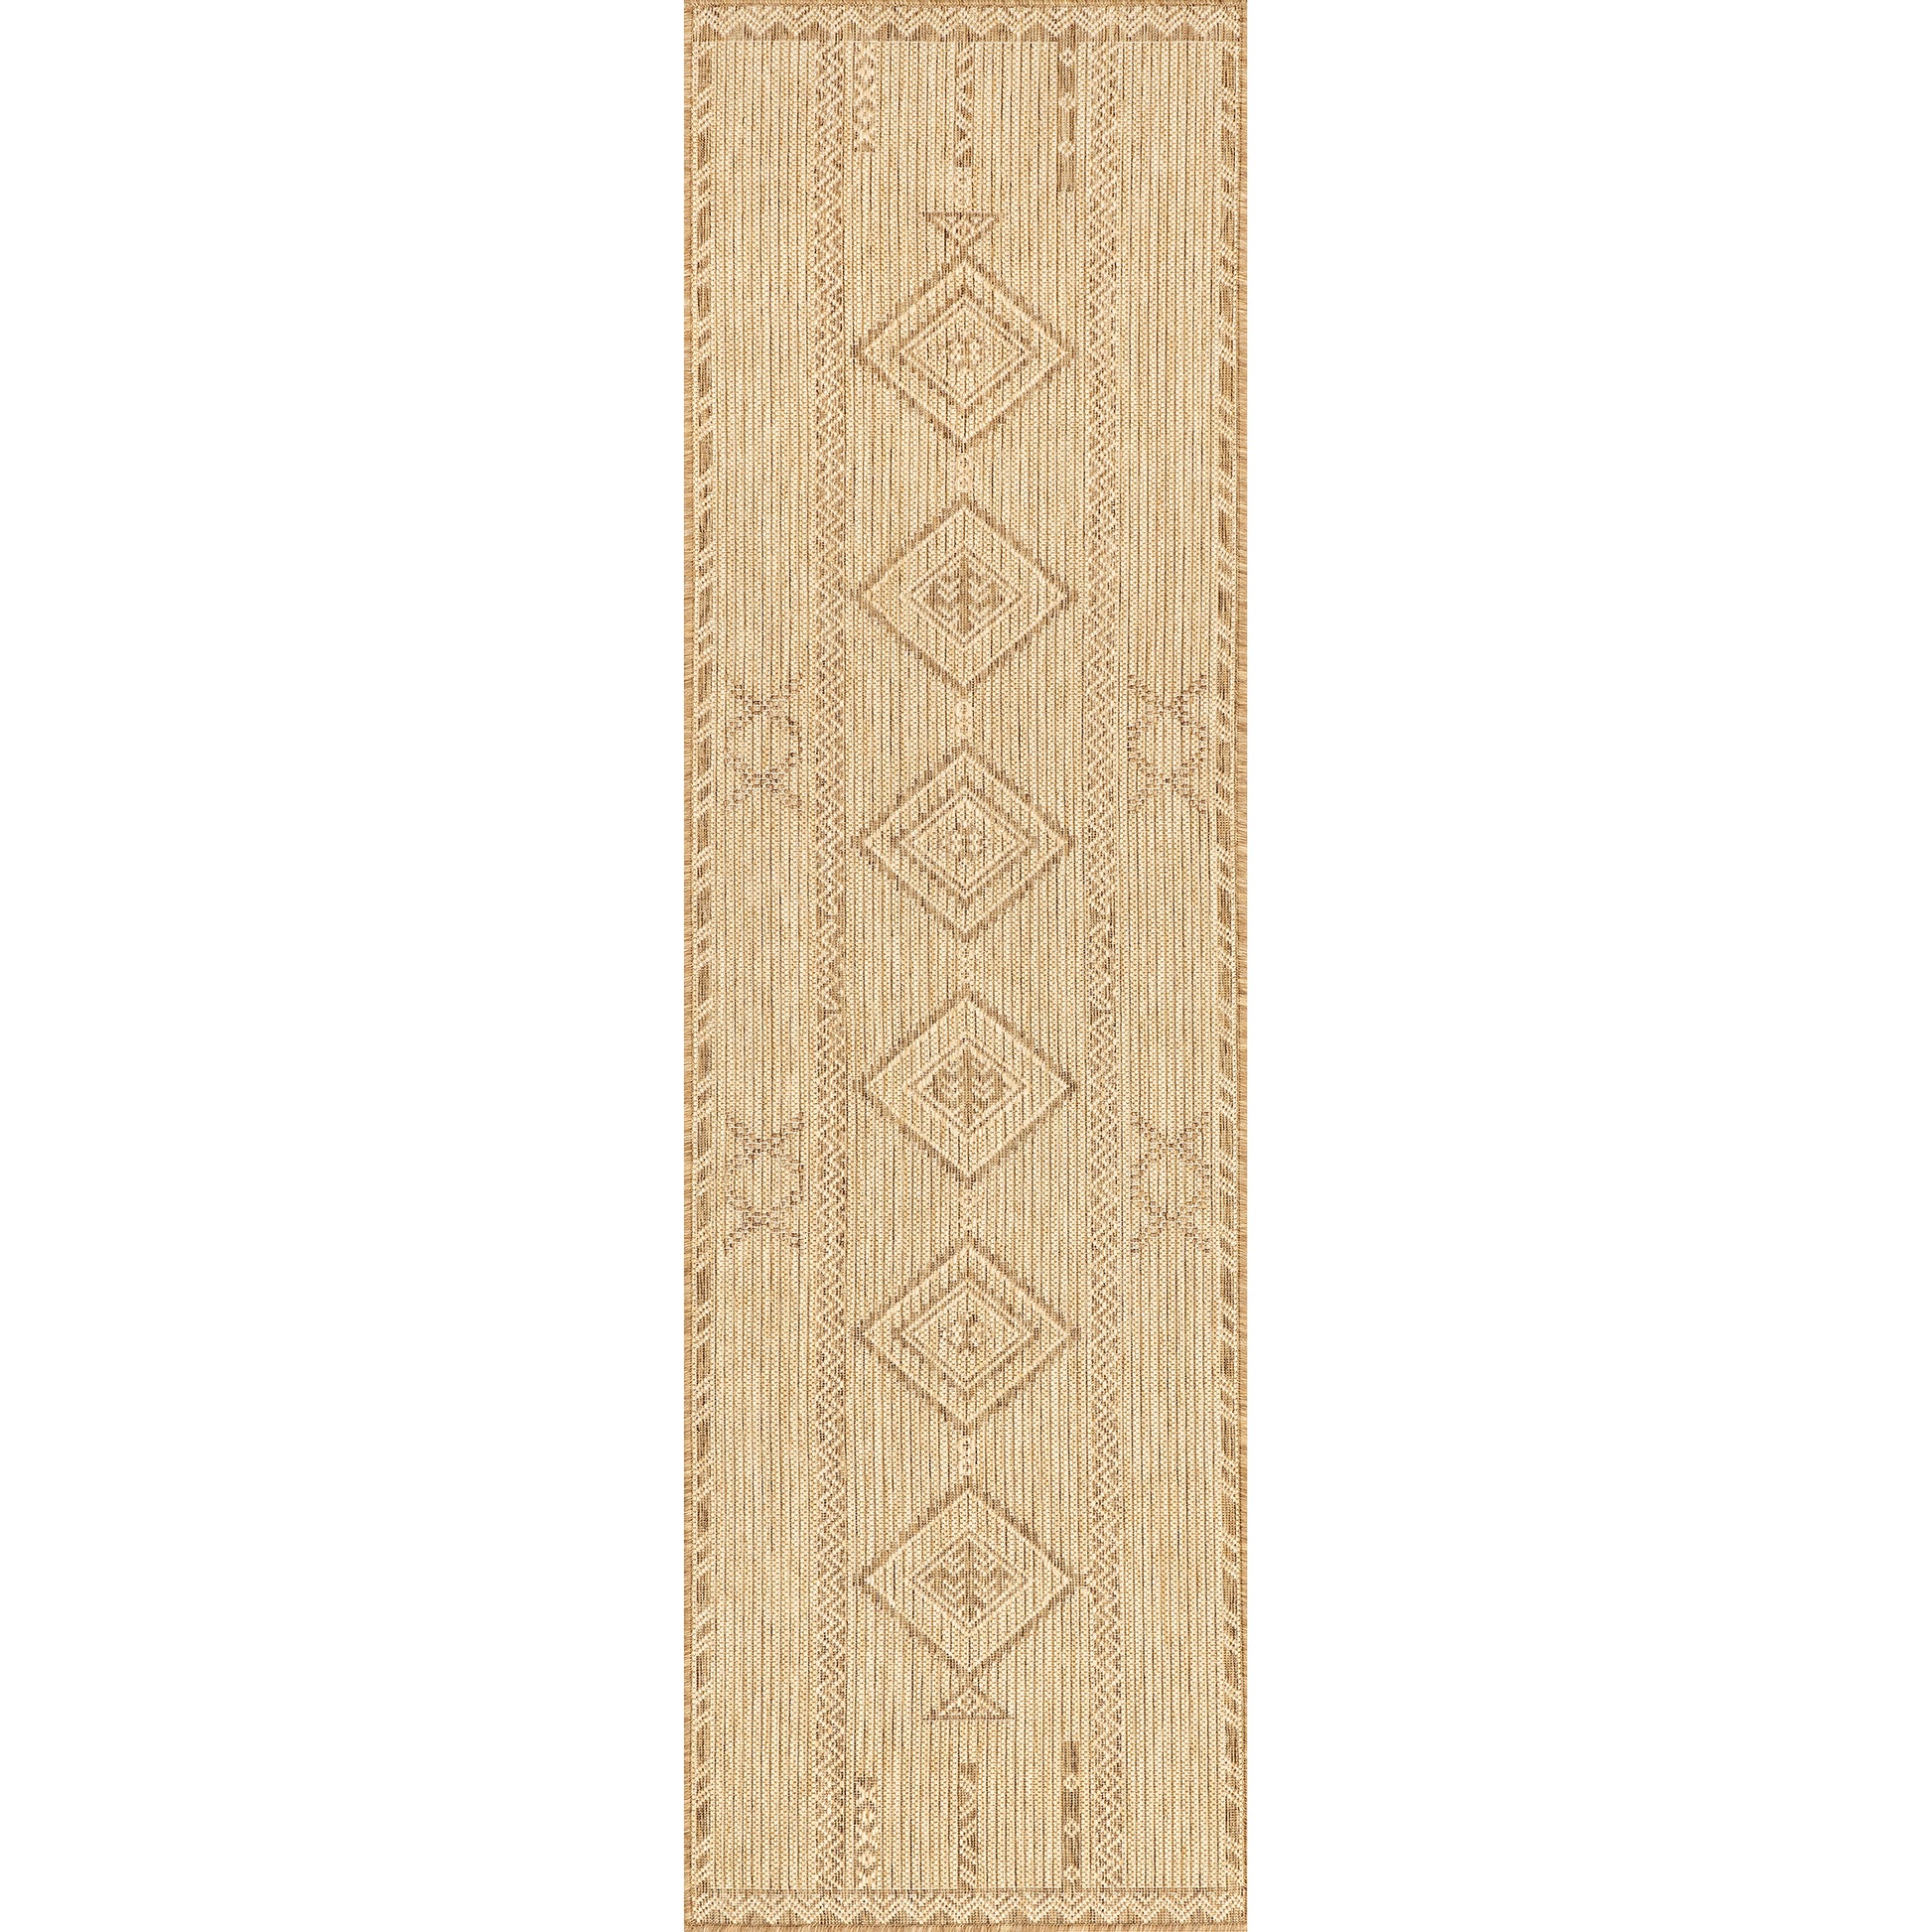 Nuloom Aria Tribal Transitional Nar1809A Beige Area Rug